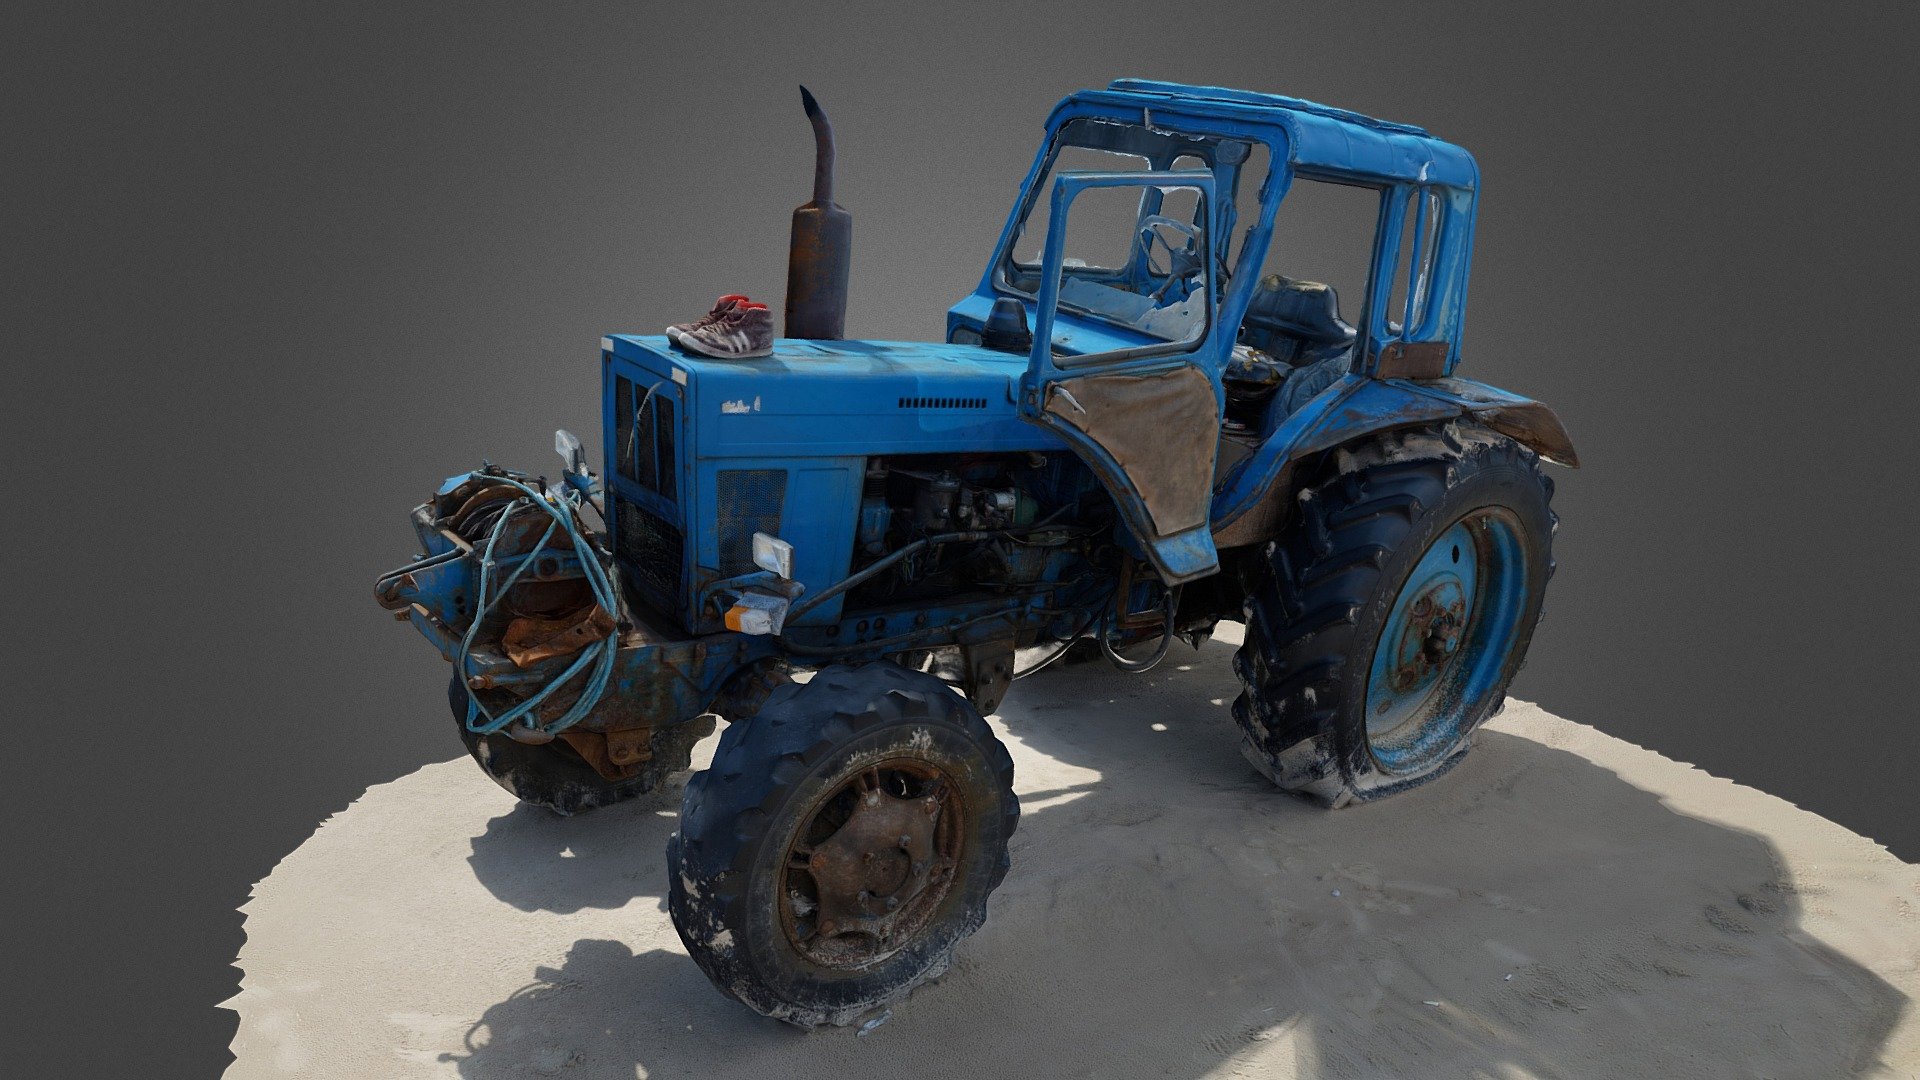 Old, rusty, blue tractor seemingly abandoned at a sea shore. 
Rusty metal, one flat tire, sand on tires, broken glass. 
A pair of sneakers on the front for some reason 3d model